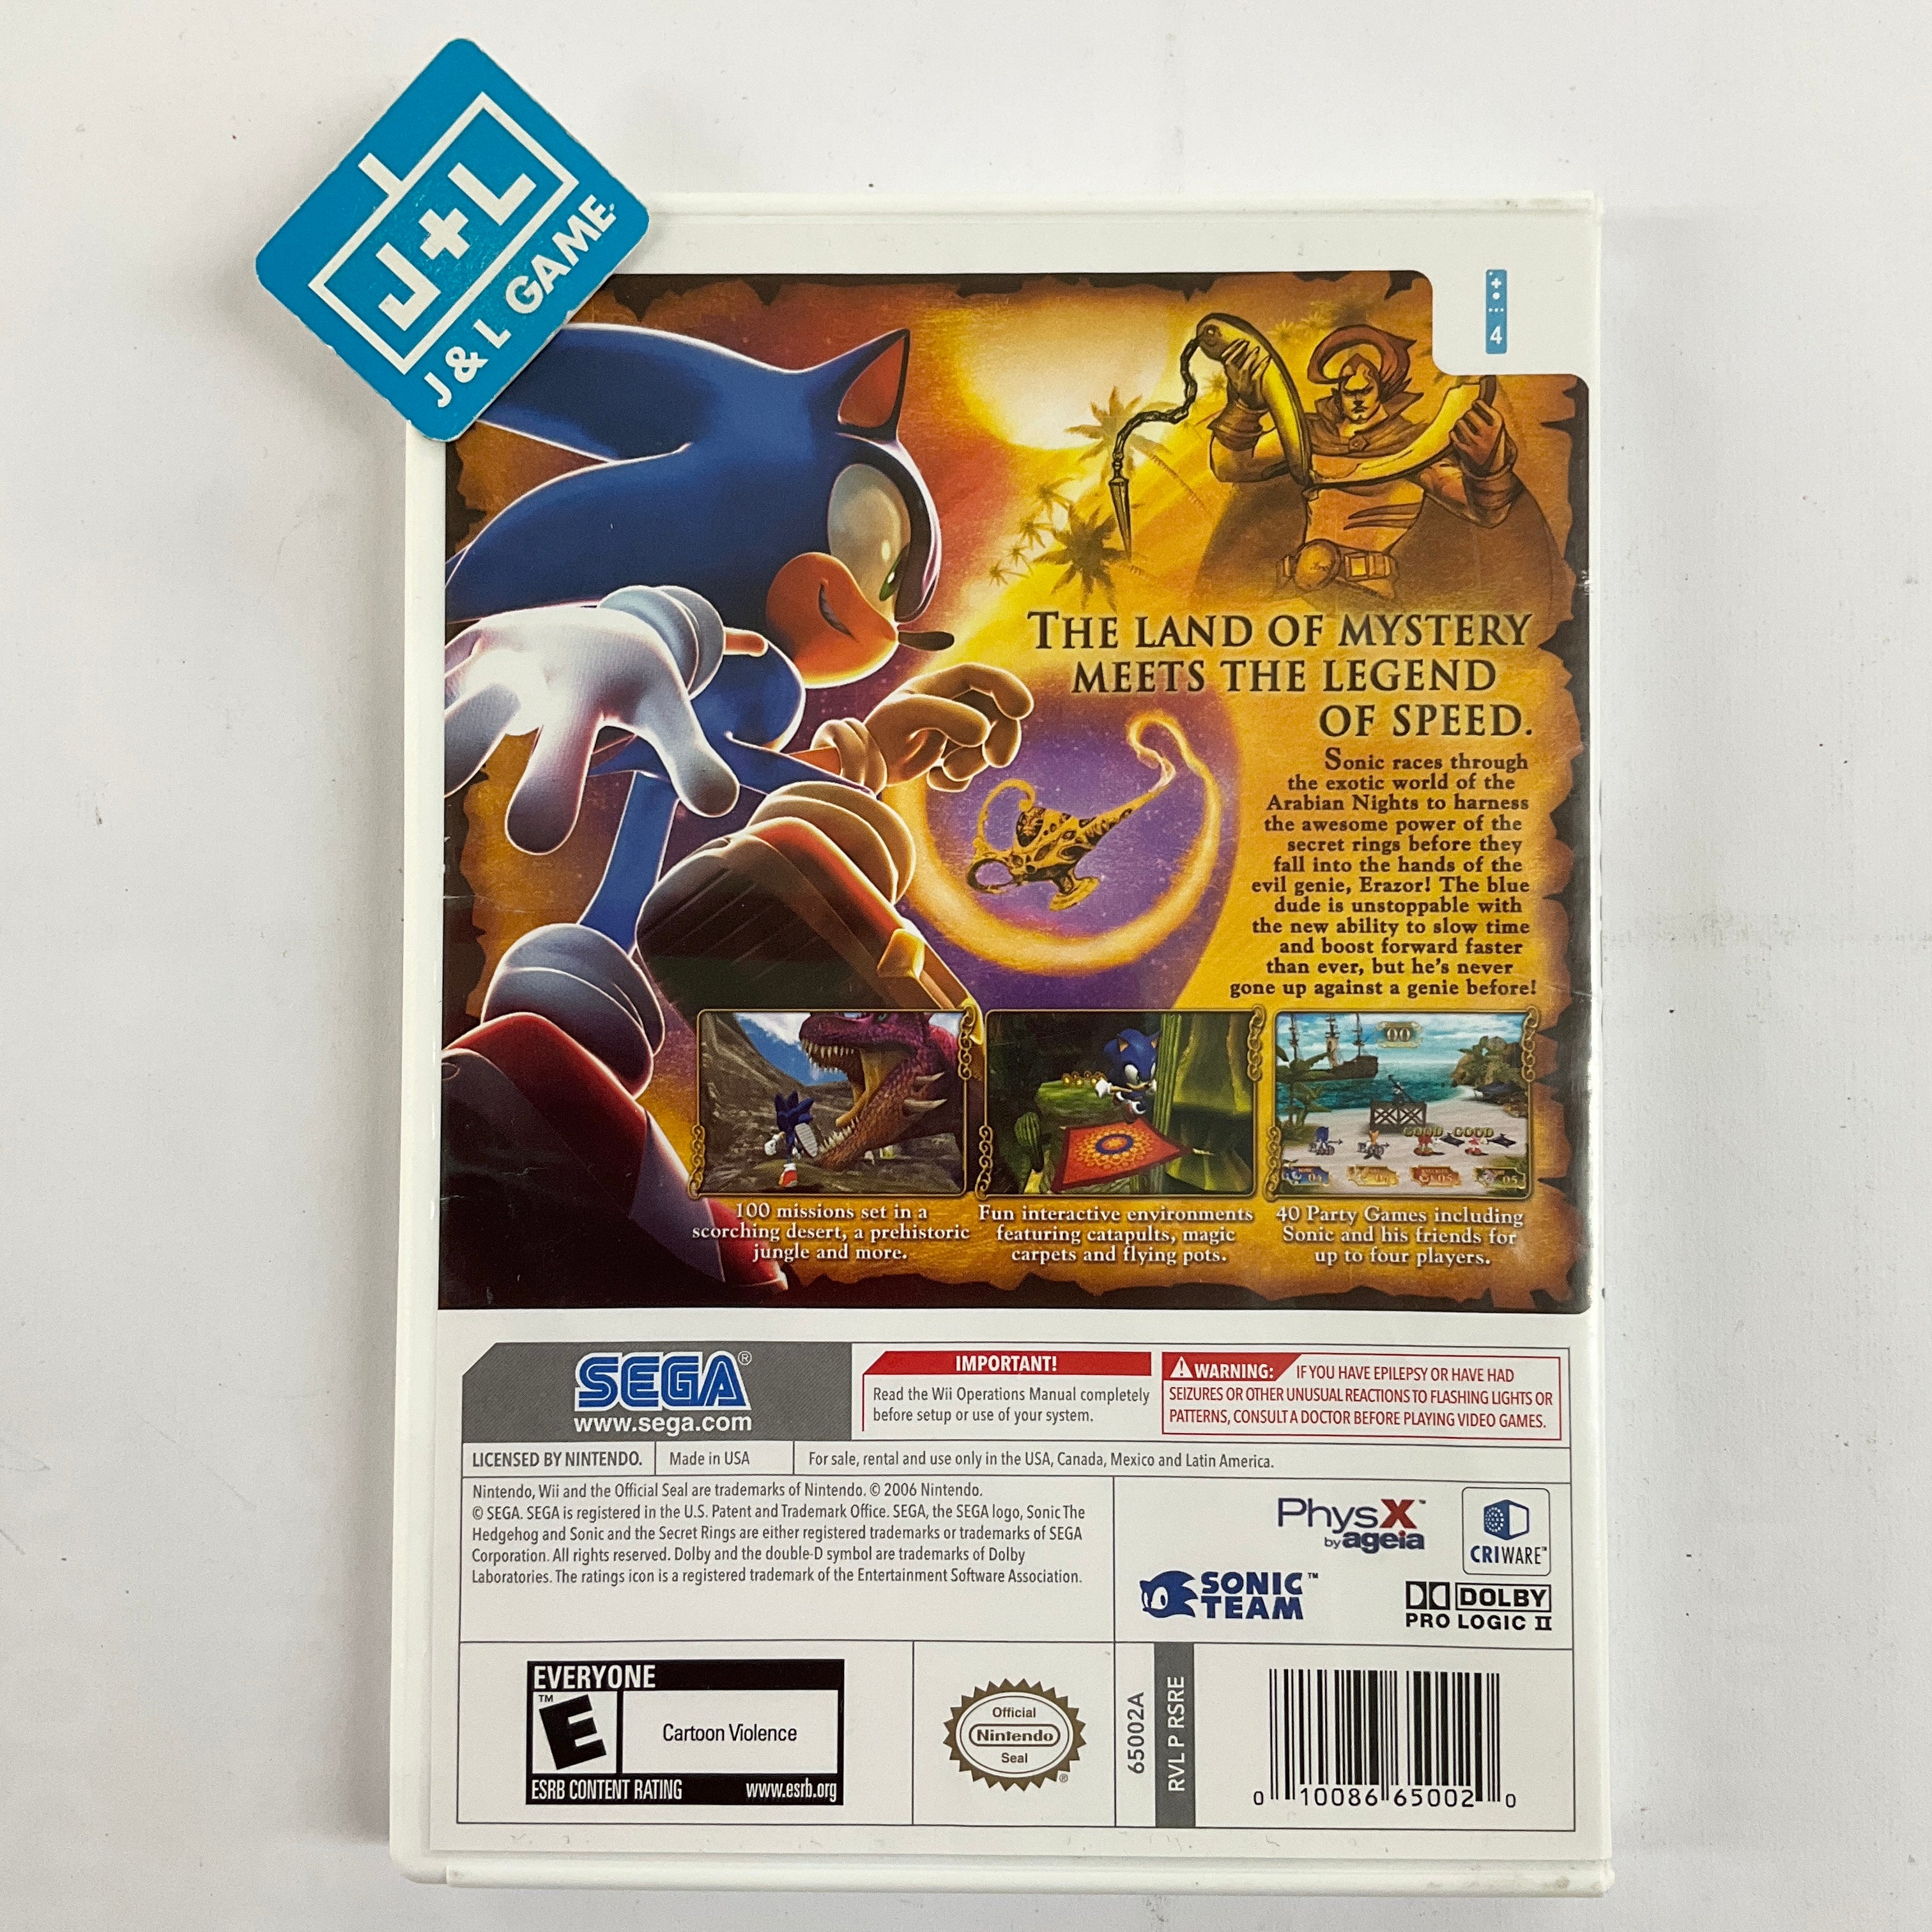 Sonic and the Secret Rings - Nintendo Wii [Pre-Owned] Video Games SEGA   